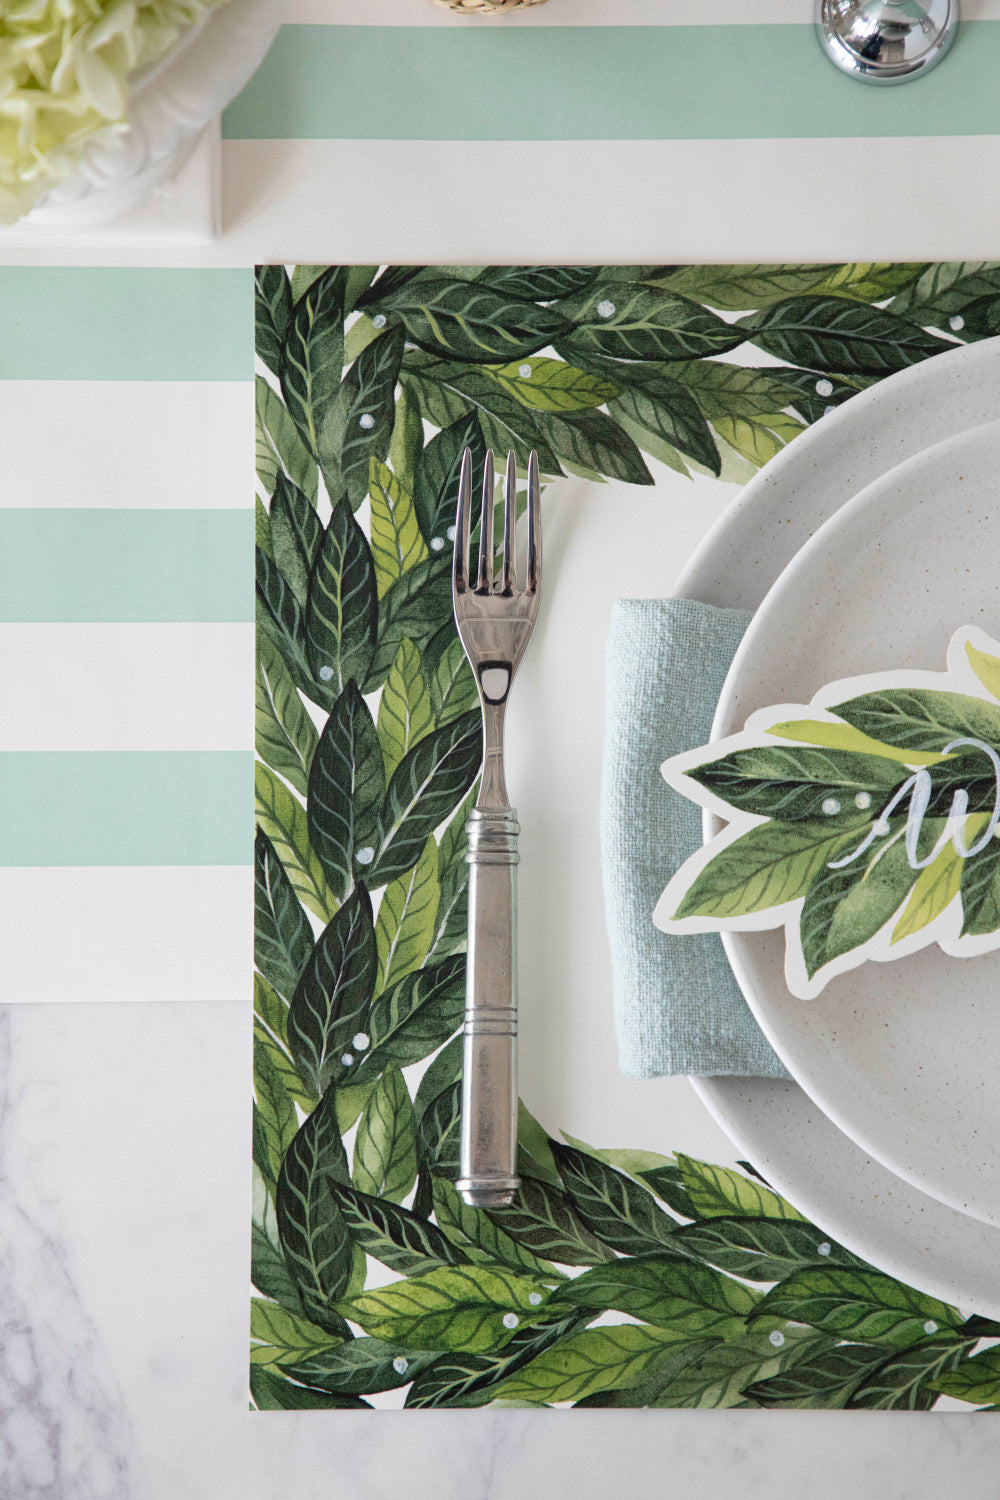 A beautifully arranged place setting with a fork and a plate, perfect for holiday parties or weddings. The table is elegantly decorated with the Hester &amp; Cook Laurel Placemat, adding a touch of sophistication to.